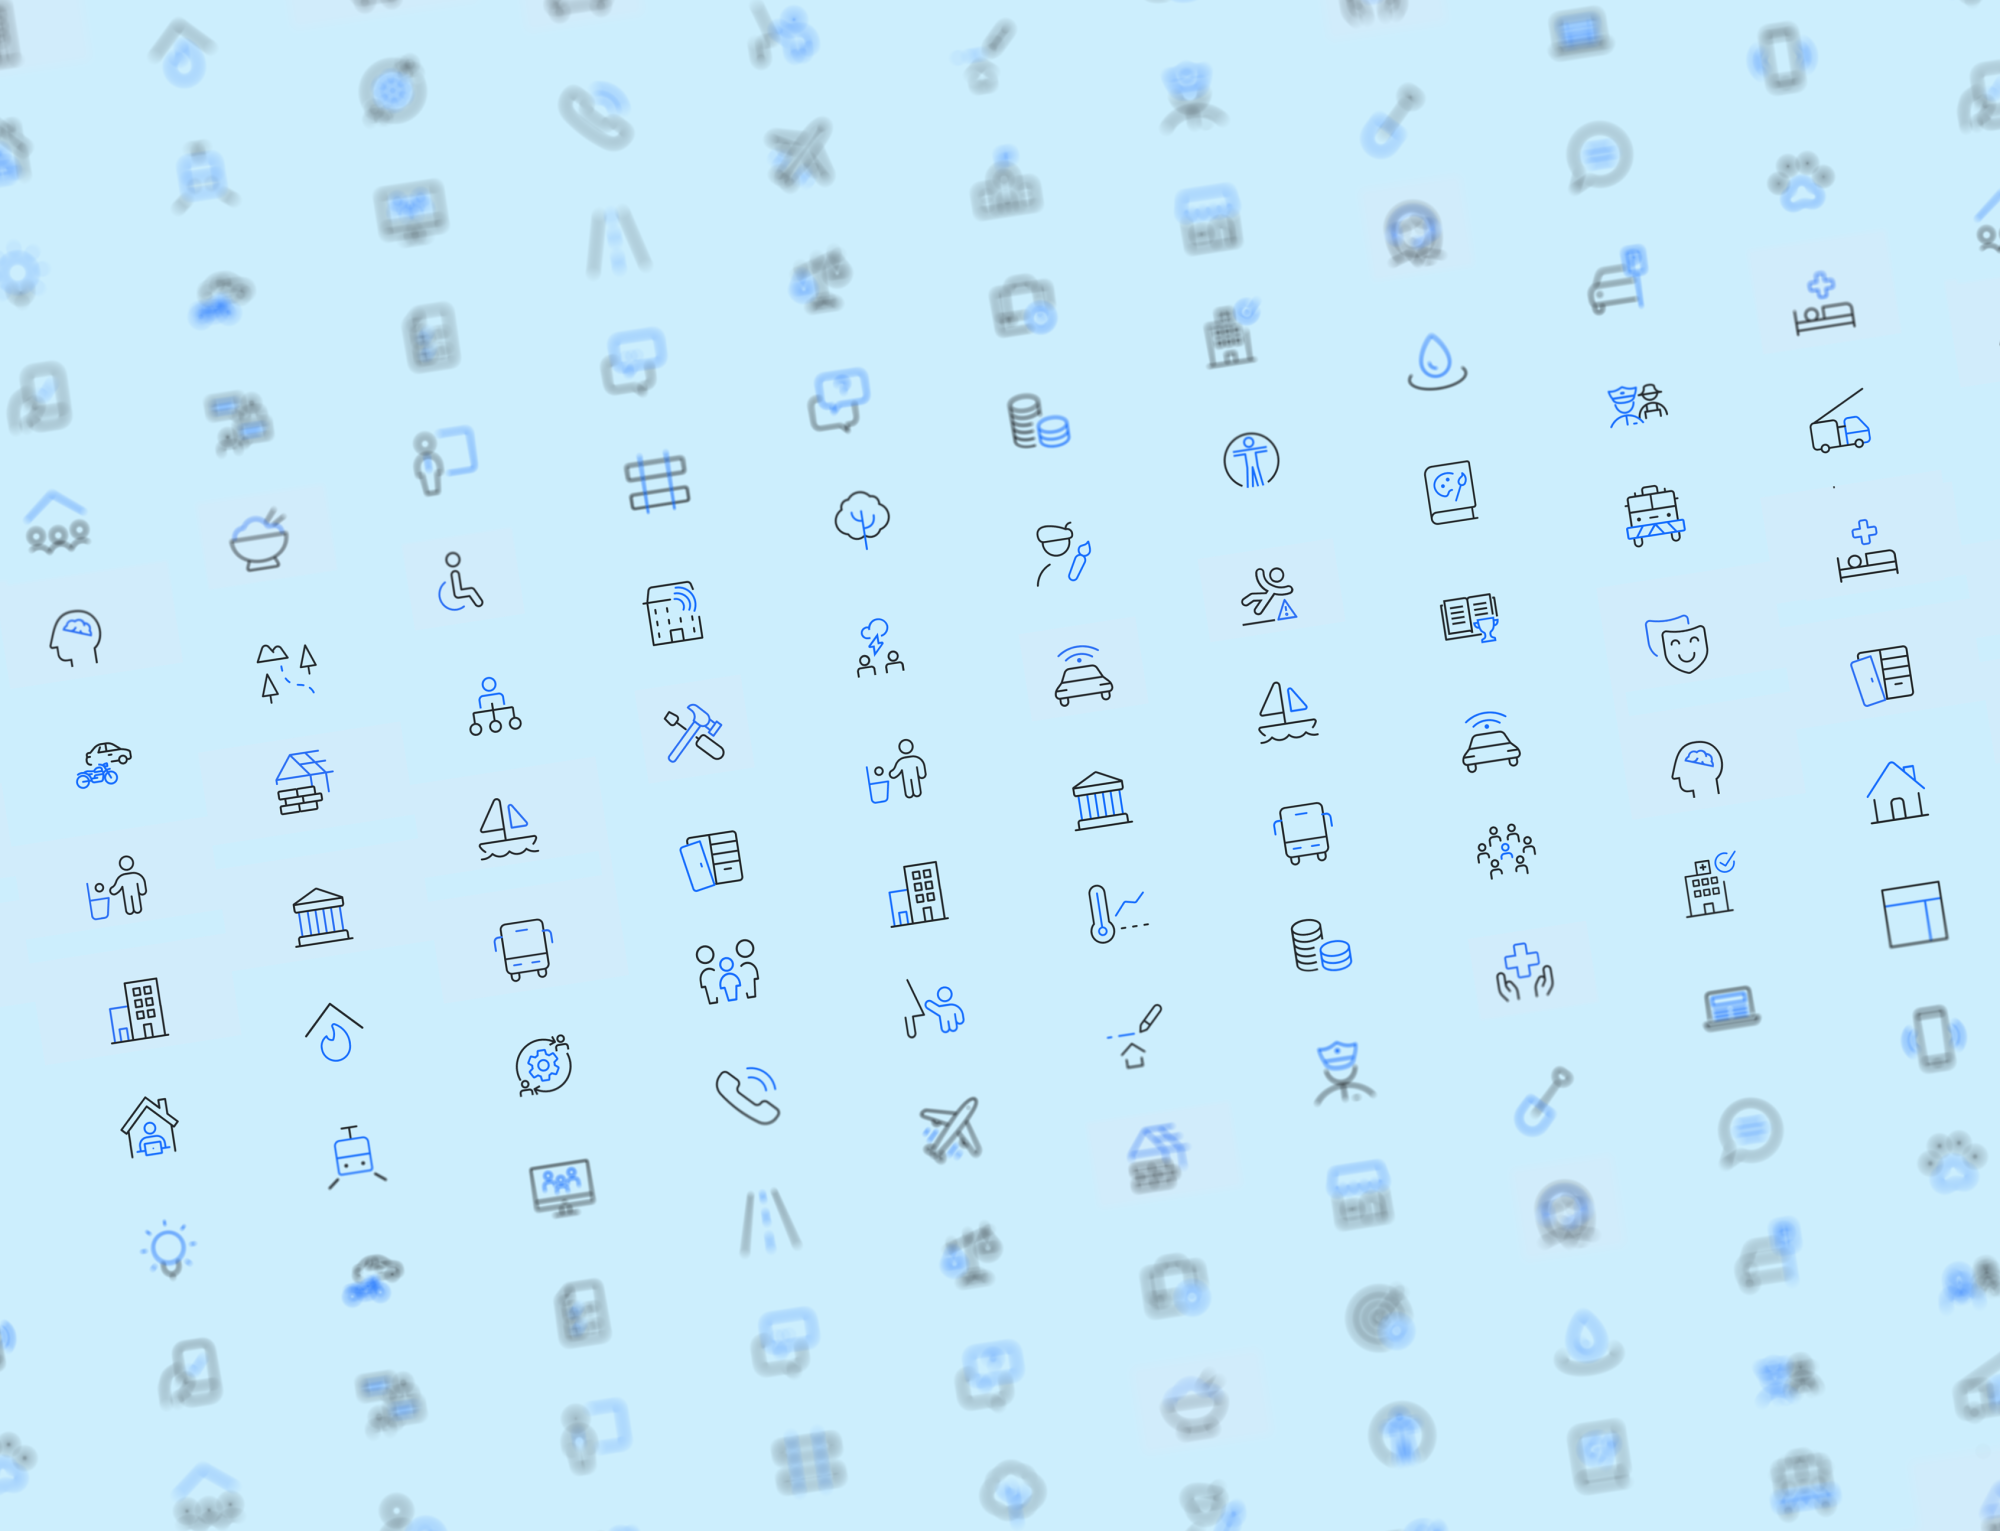 Series of icons representing businesses on light blue background with central ones in focus, fading to edges.